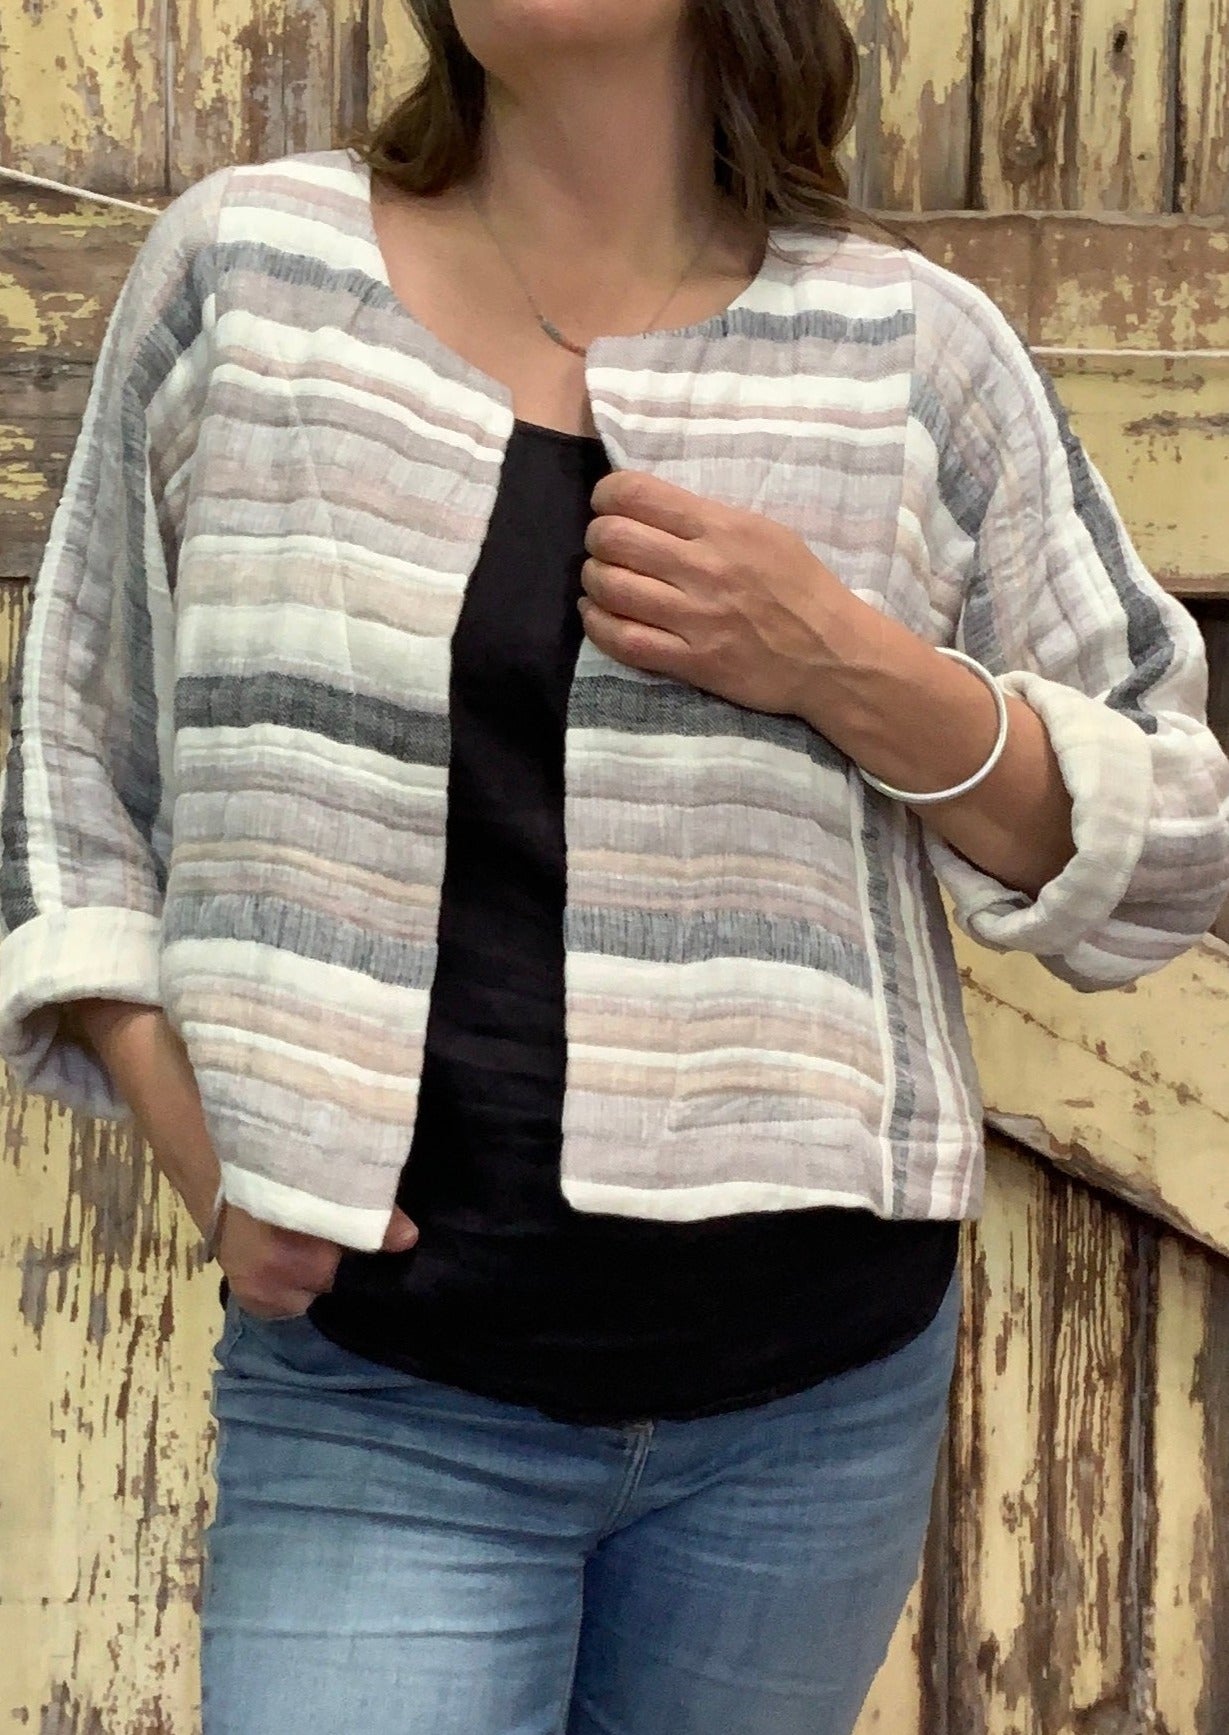 Pekho striped double faced gauze jacket.  The stripes are horizontal on this version.